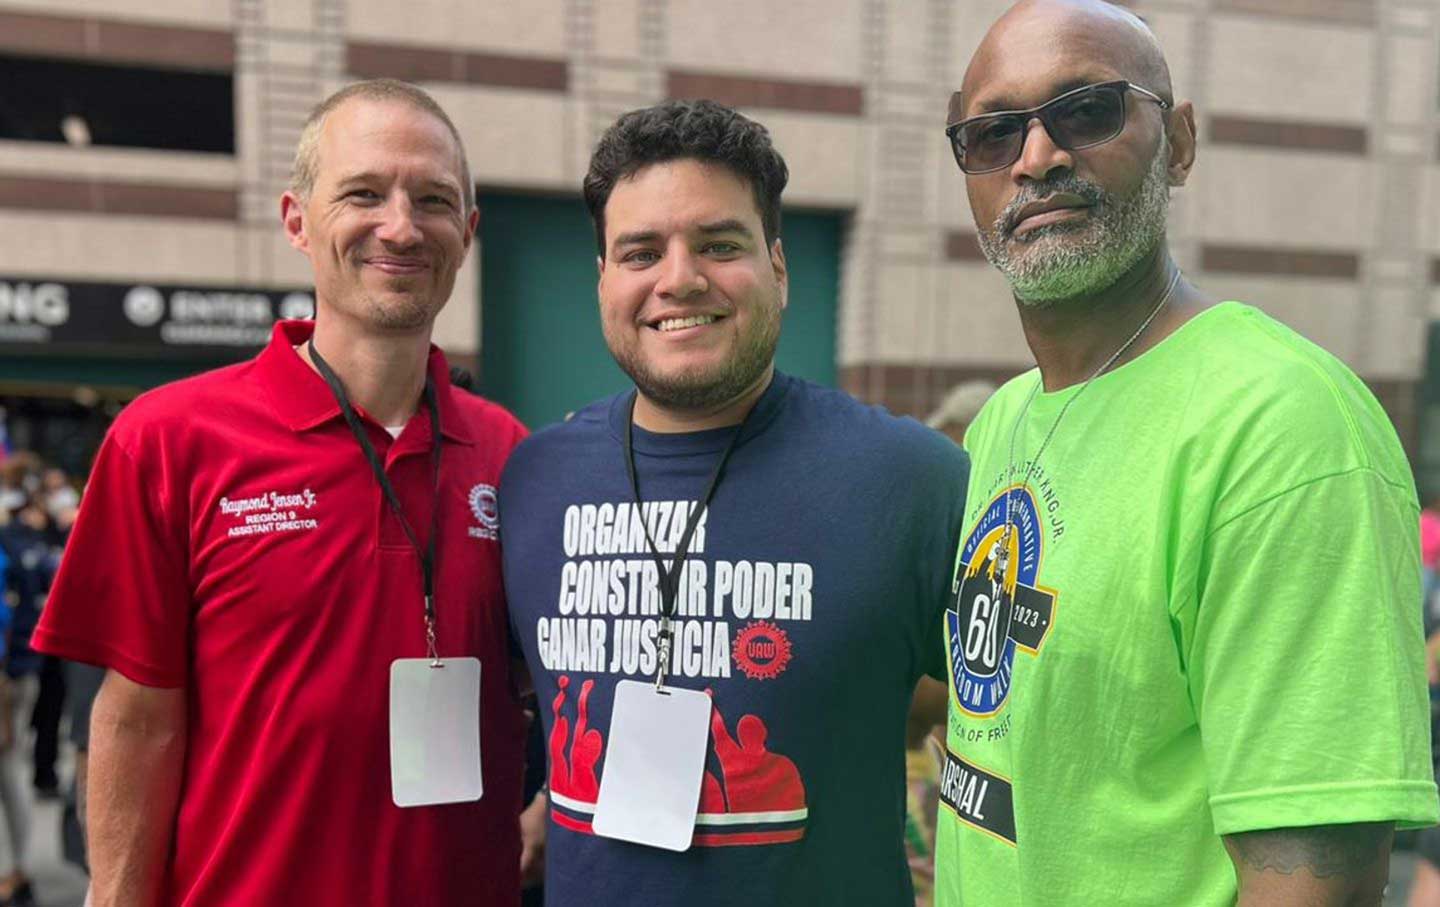 Brandon Mancilla (center) with Ray Jensen Jr., UAW Region 9 Assistant Director (left) and UAW member Donald Foster.